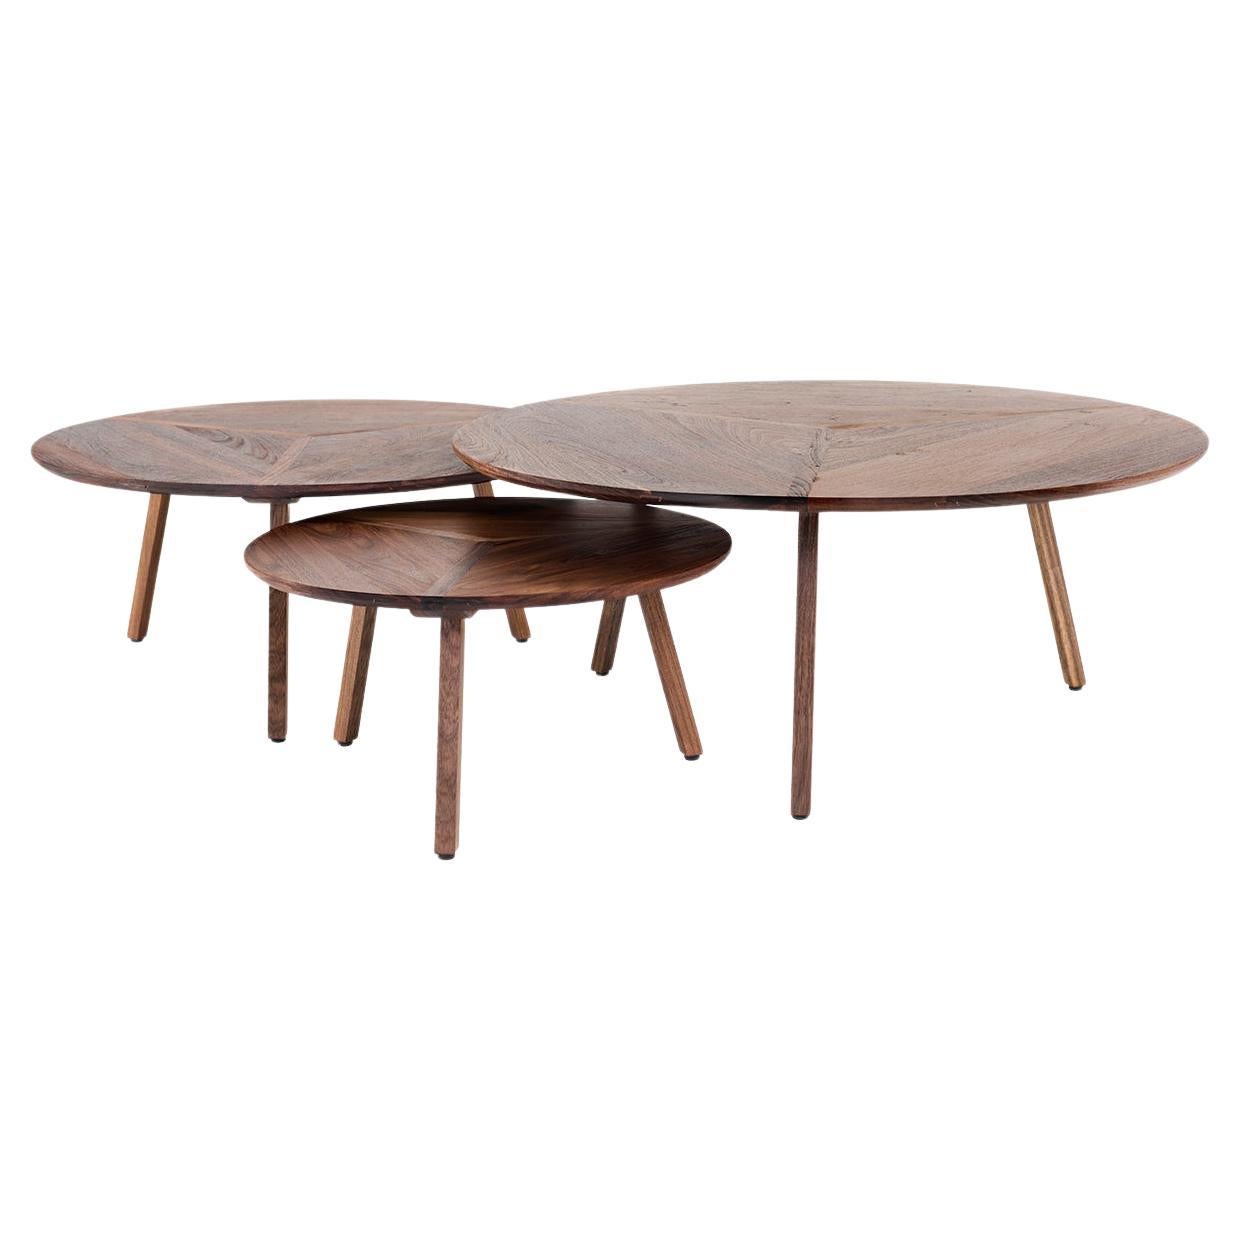 Mesas Circuito, Mexican Contemporary Set of Coffee Tables by Emiliano Molina For Sale